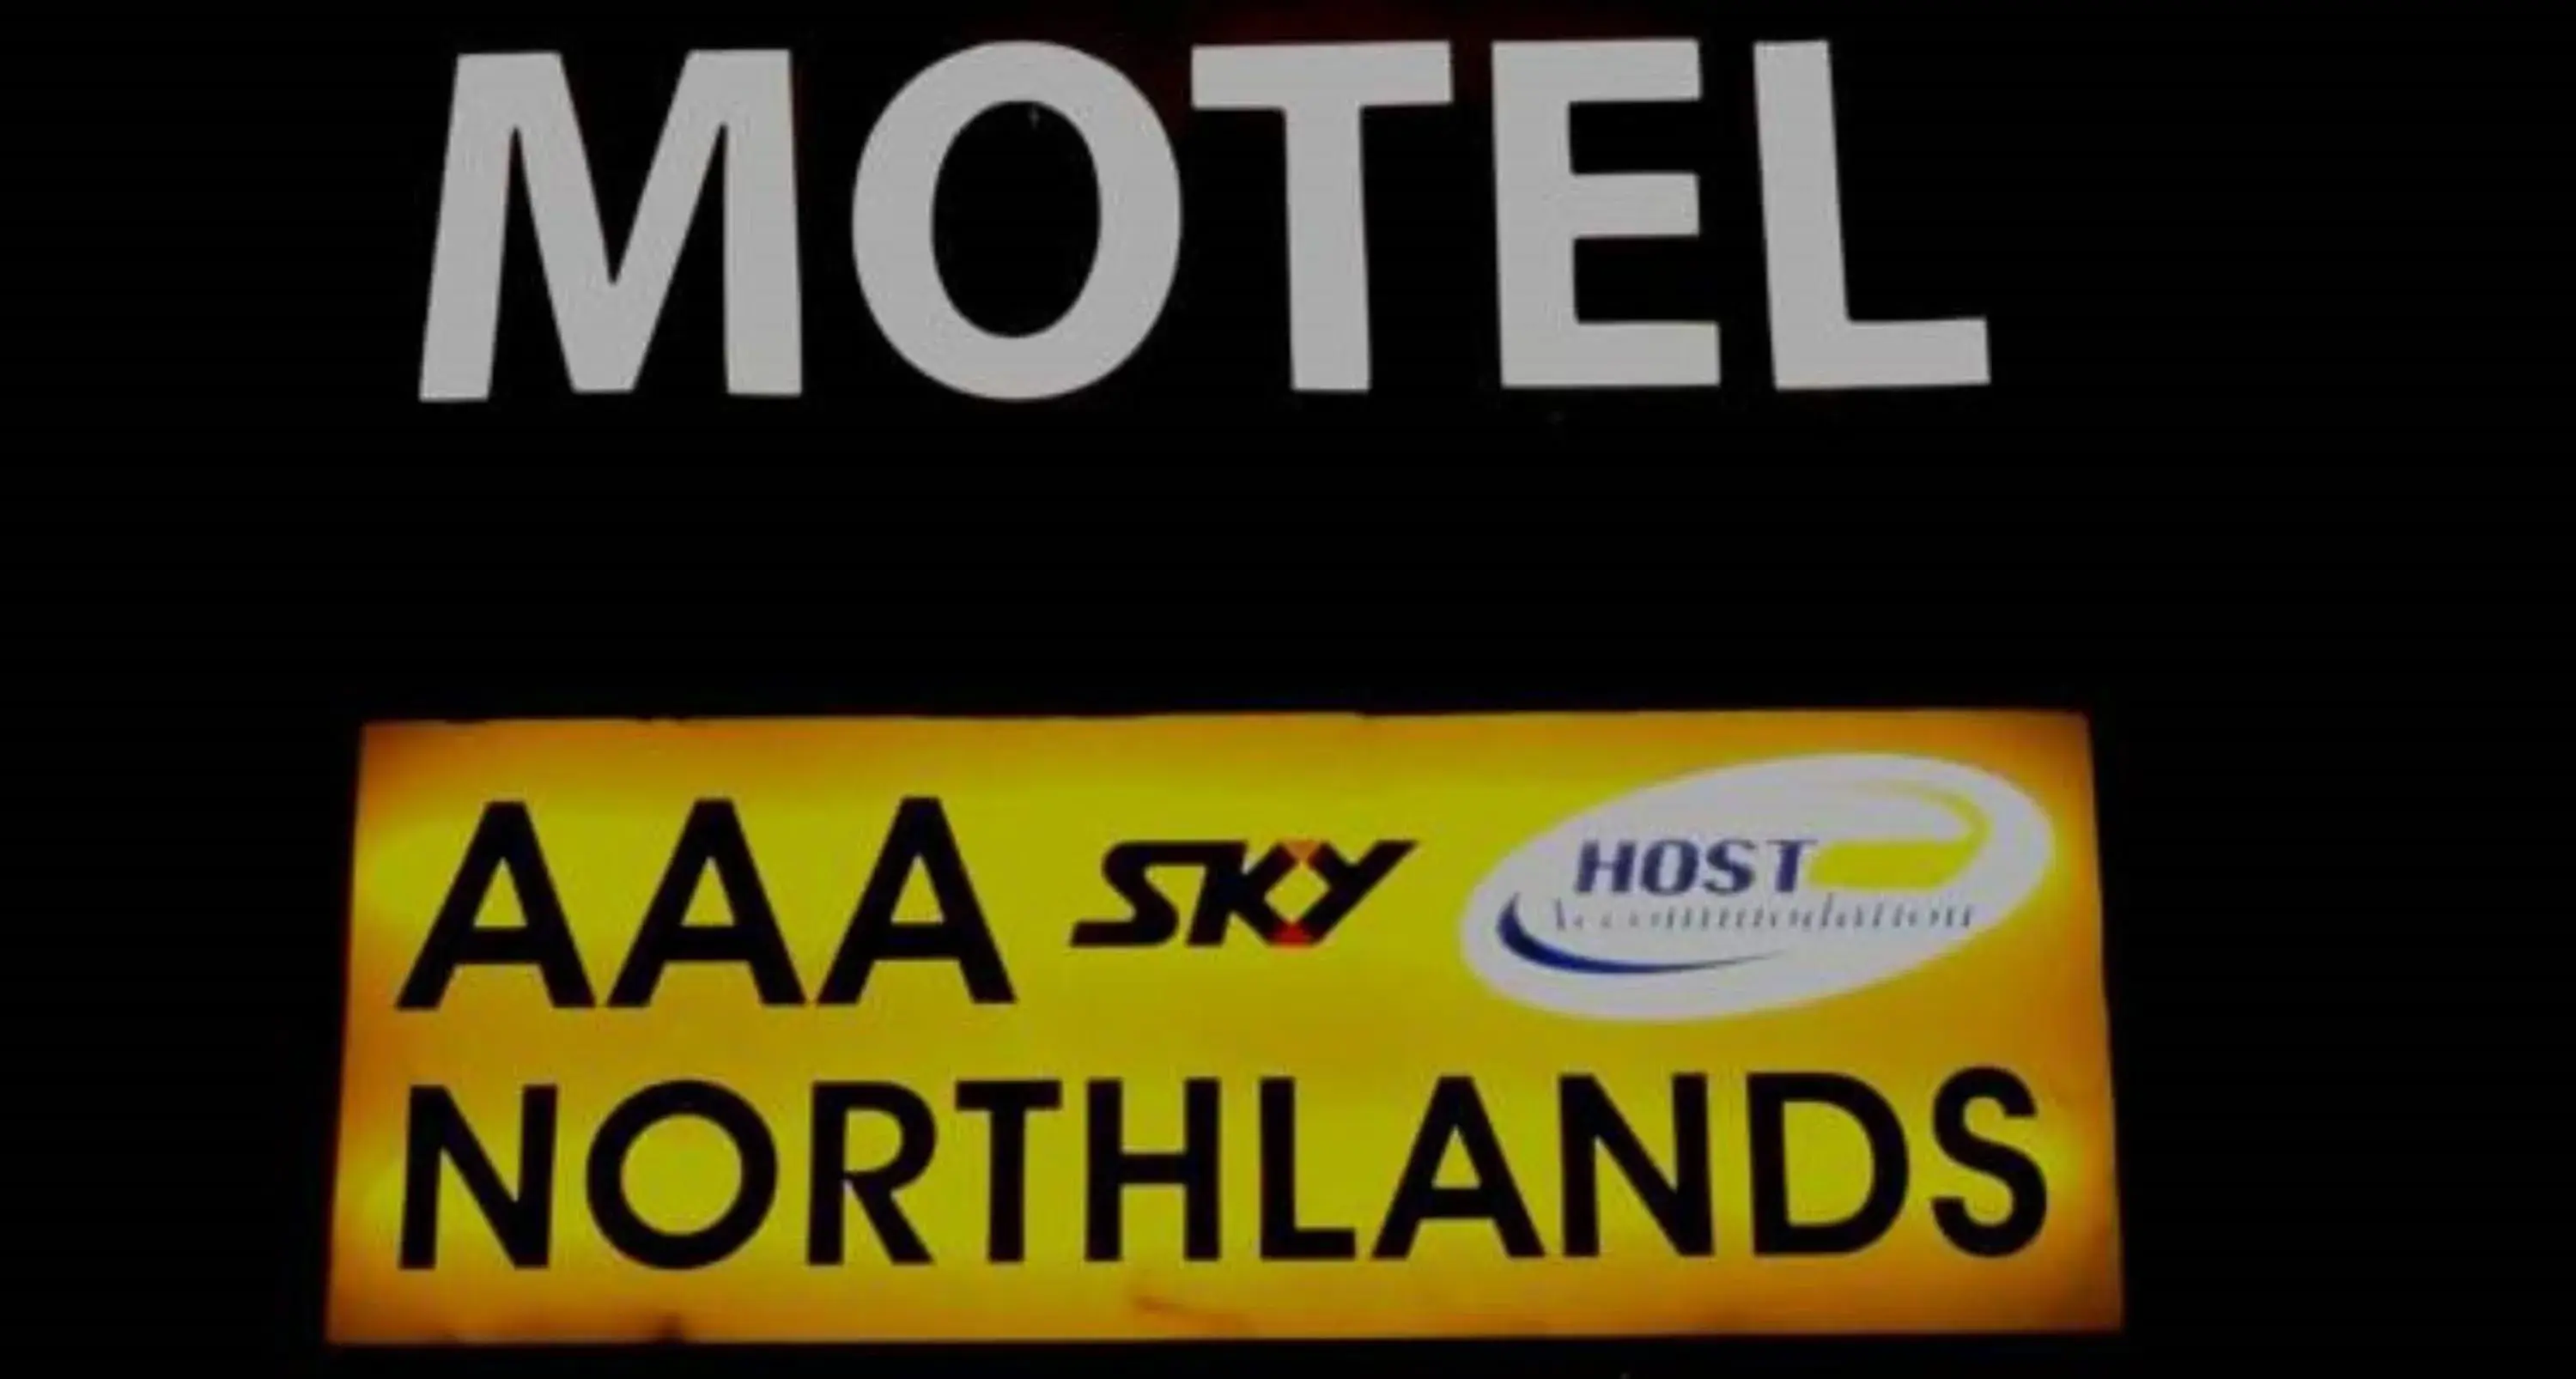 Property logo or sign in AAA Northlands Motel